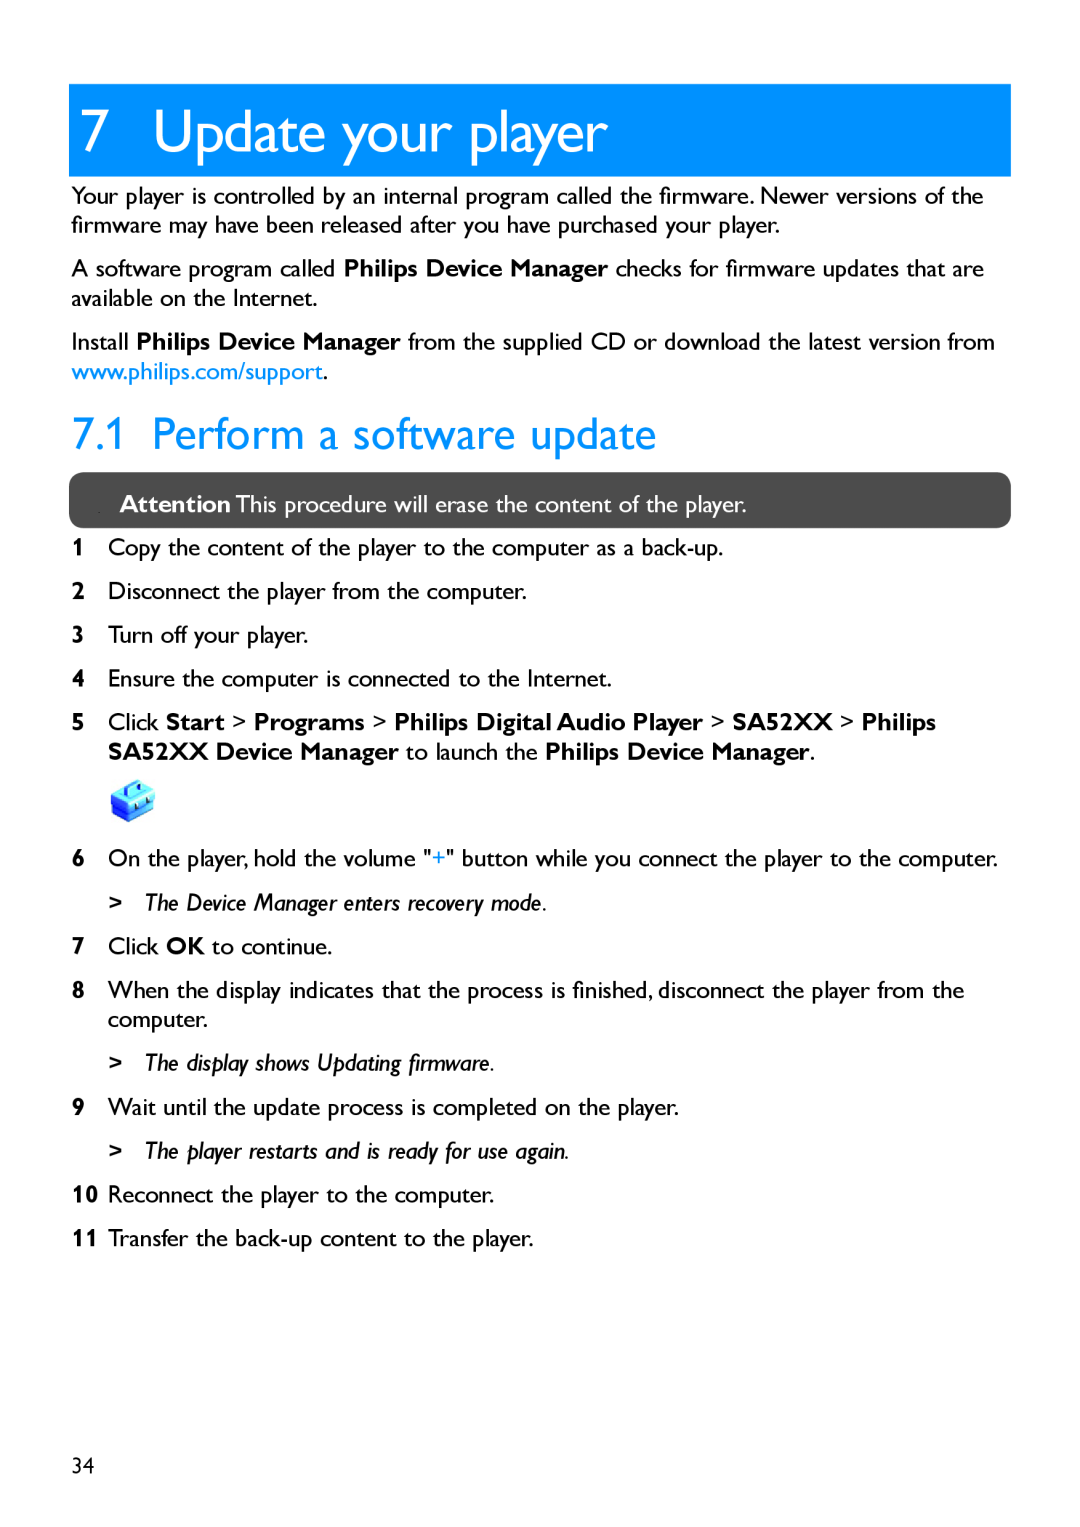 Philips SA5295, SA5225 manual Update your player, Perform a software update 